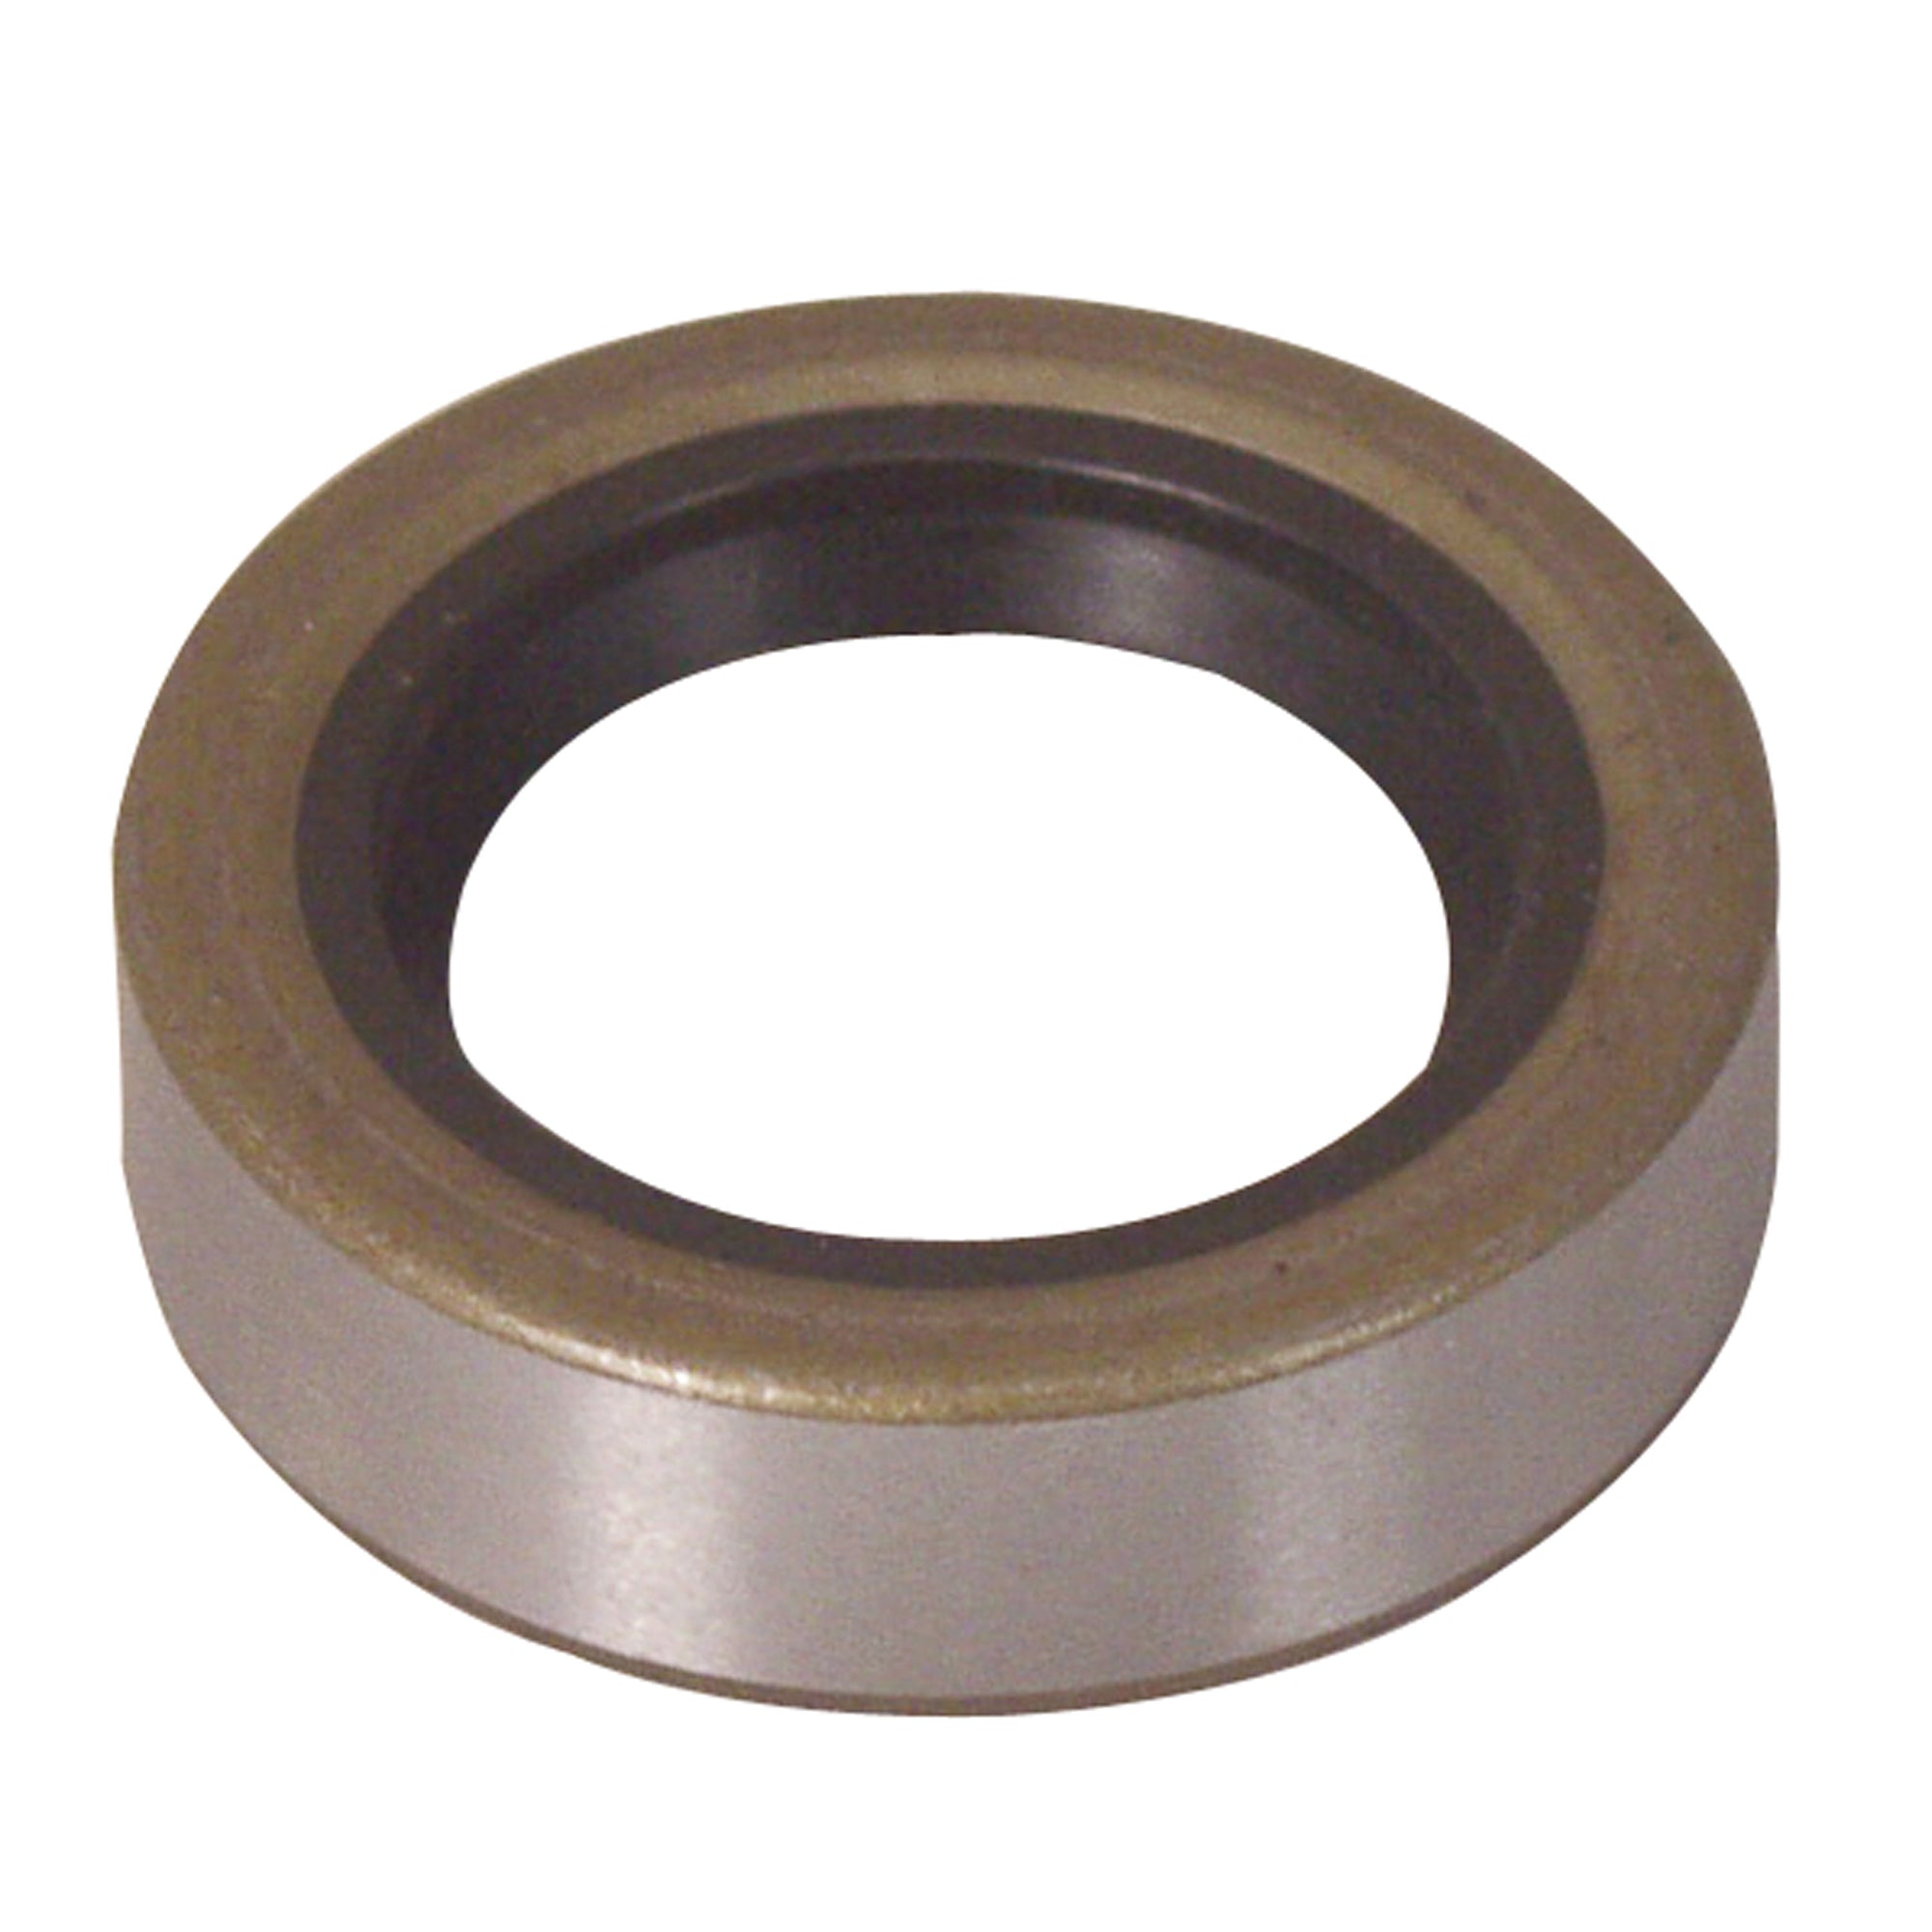 Dutton-Lainson 21818 Grease Seal - 1-1/4 in.